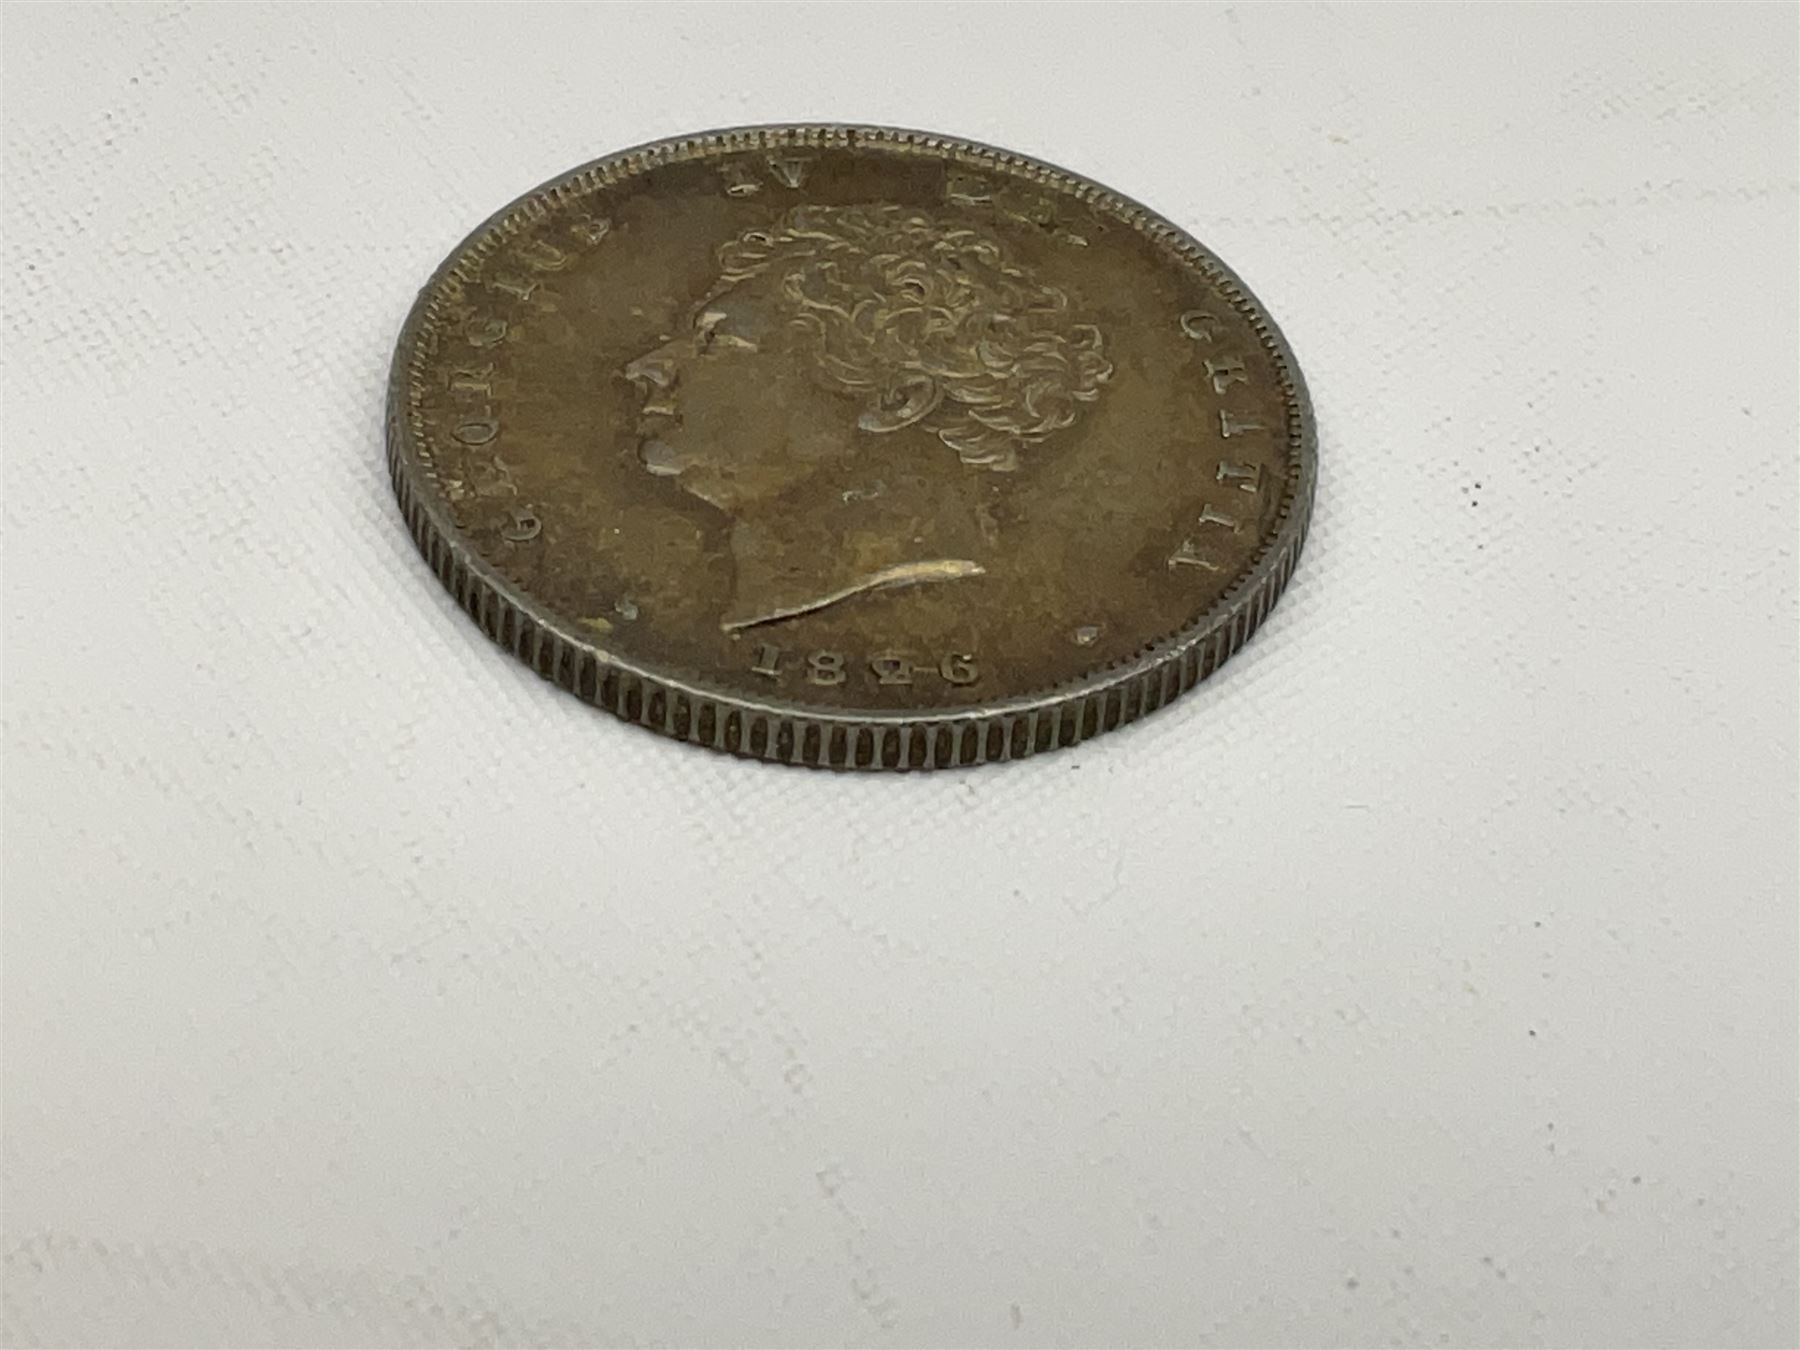 King George IV 1826 shilling coin - Image 3 of 6